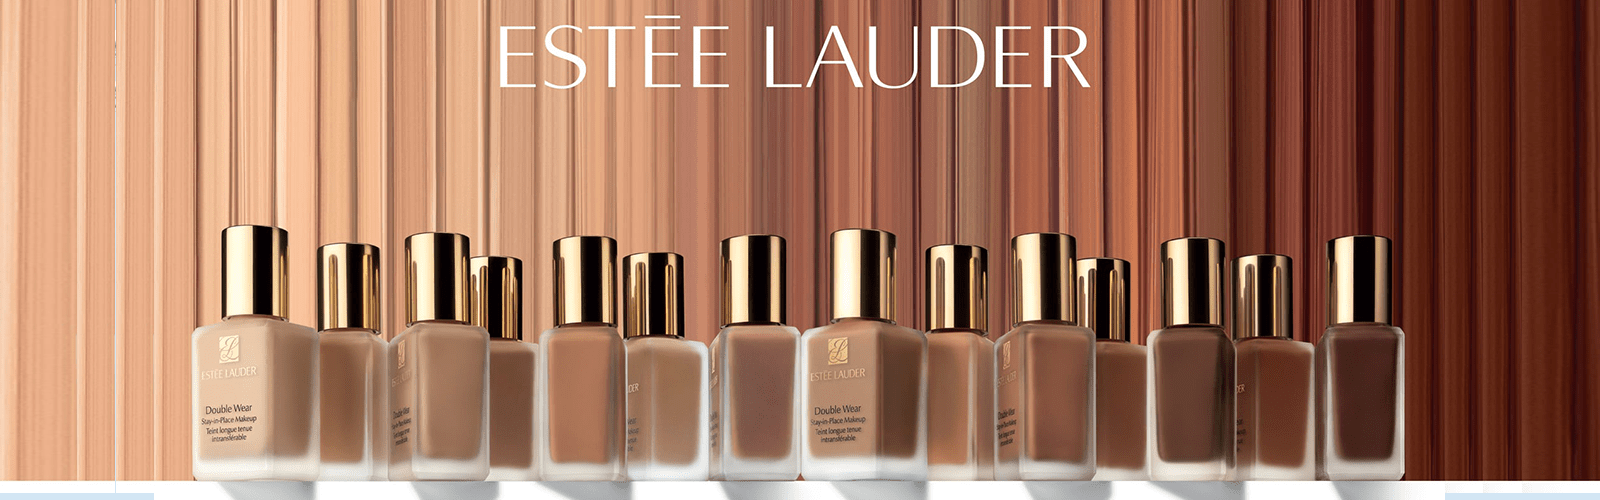 Estee Lauder foundations Face Powders makeup for women for at best prices